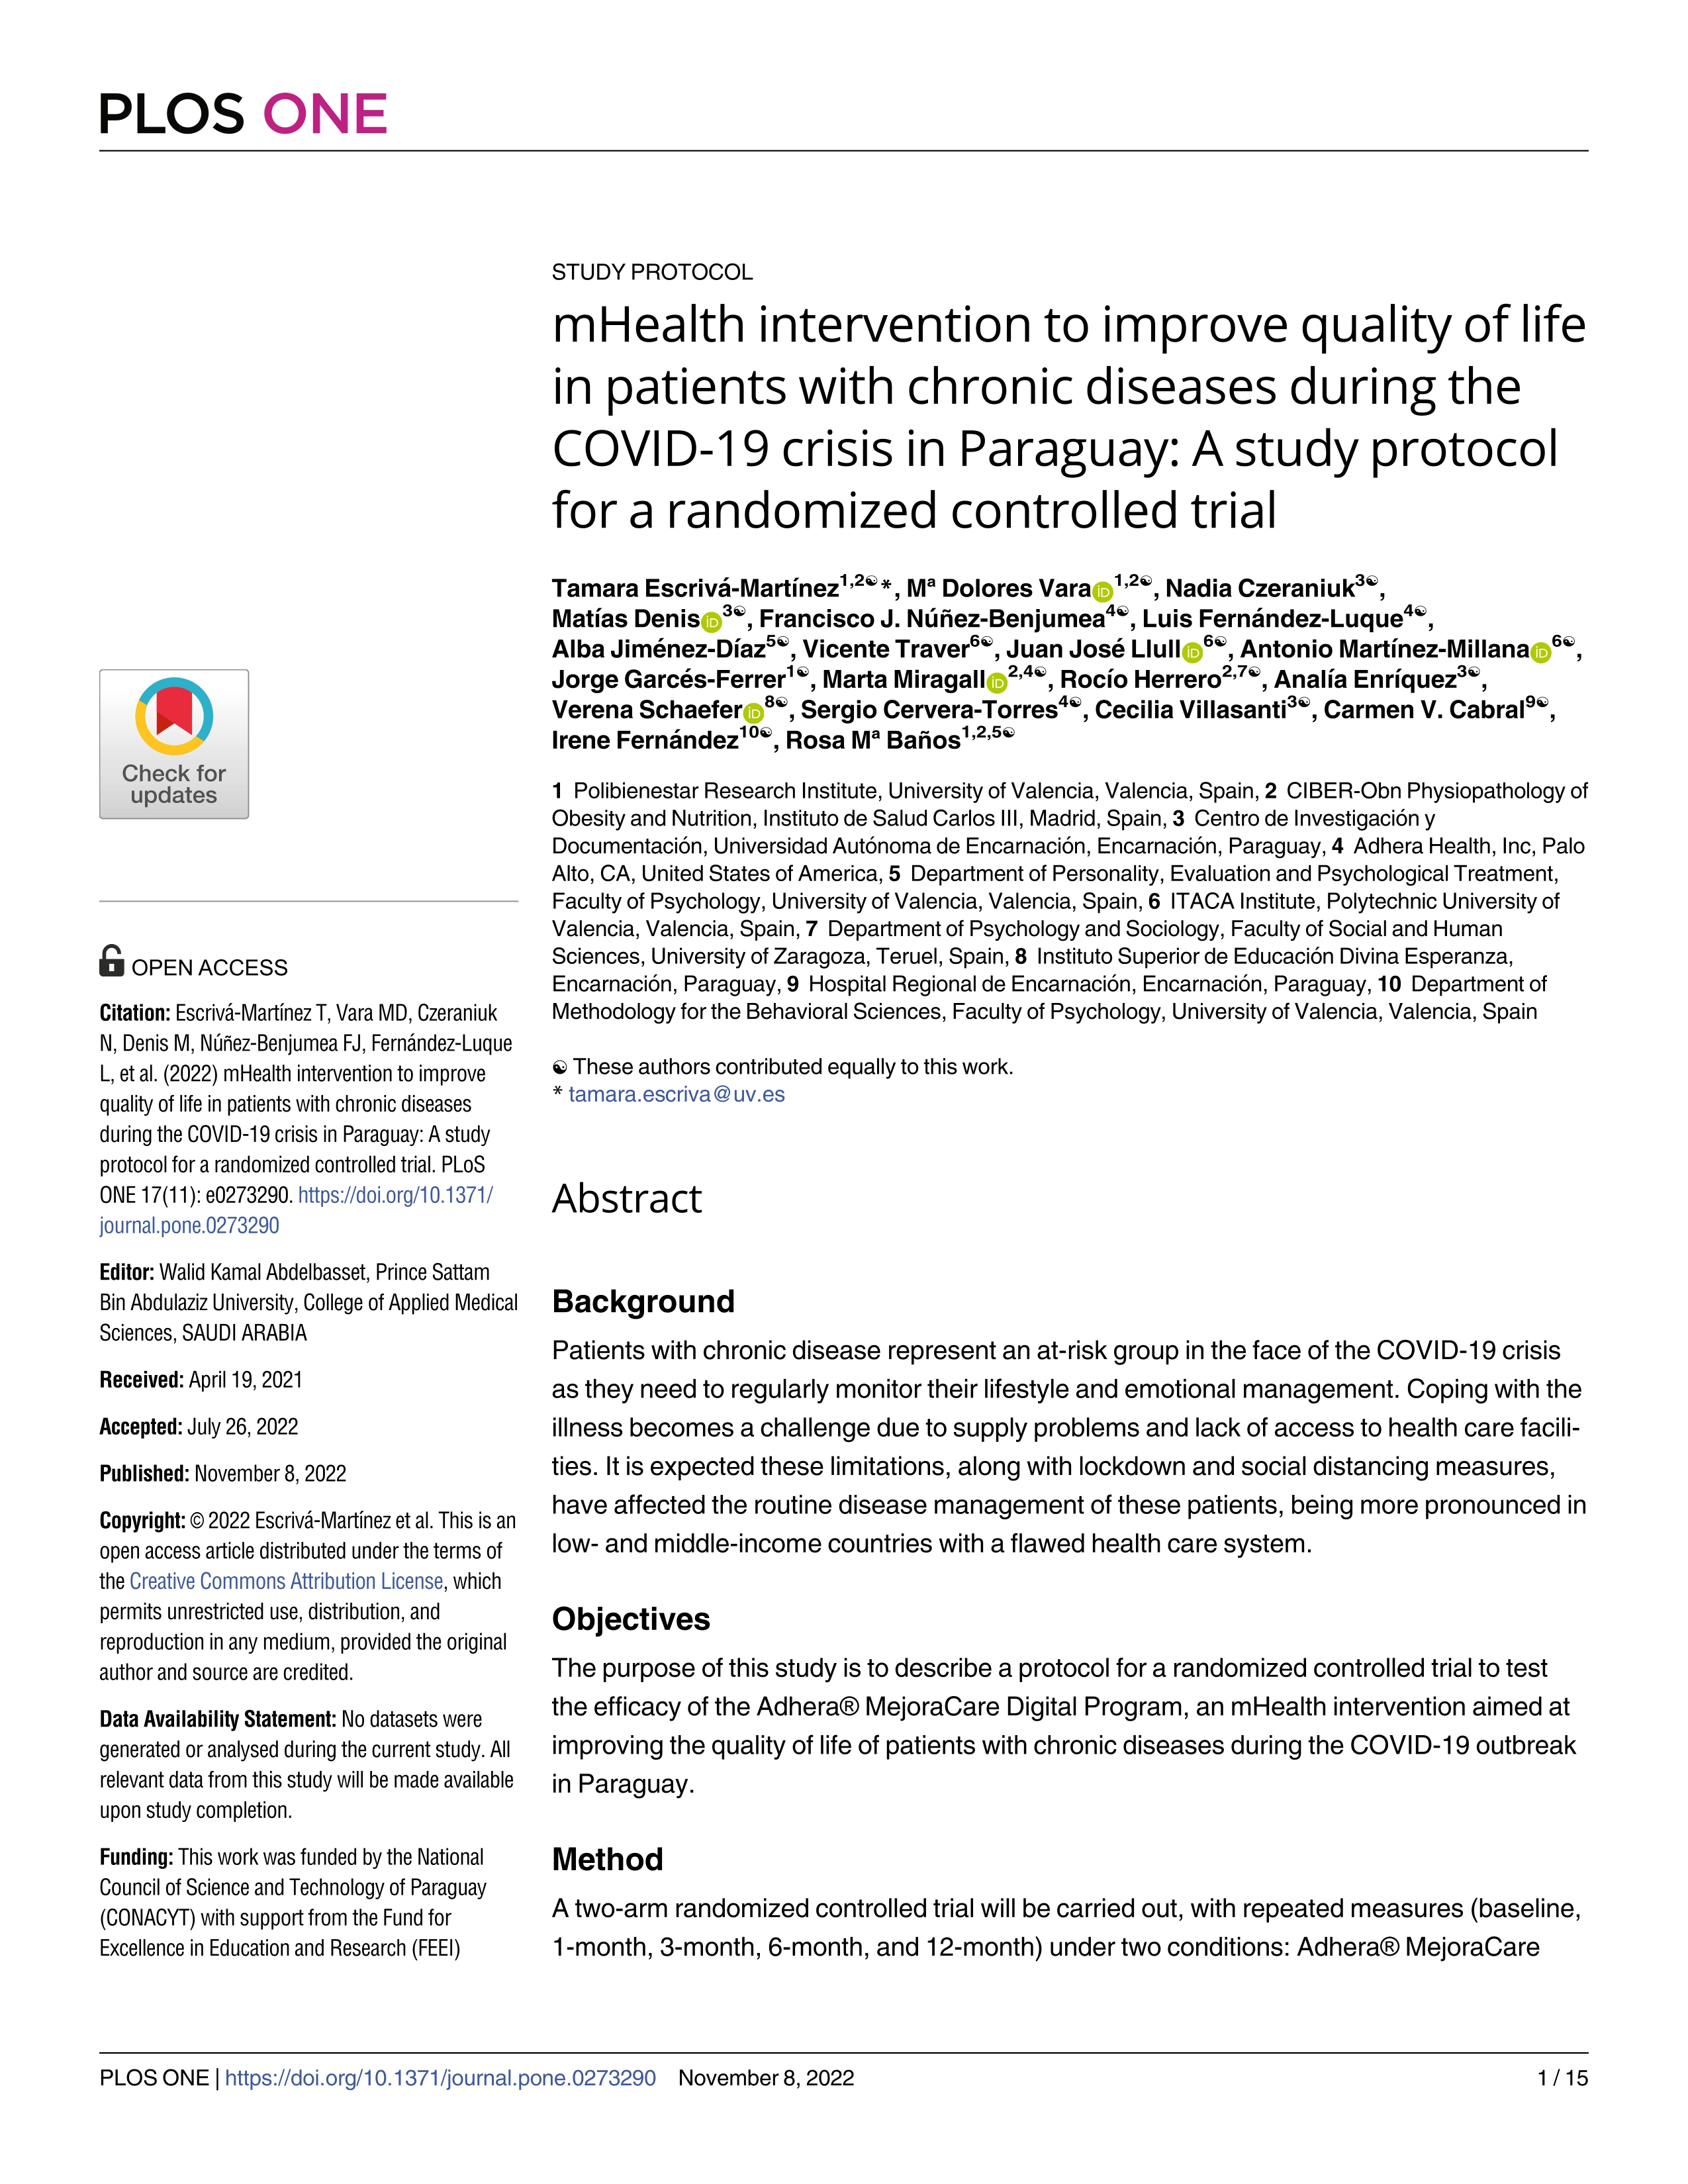 mHealth intervention to improve quality of life in patients with chronic diseases during the COVID-19 crisis in Paraguay: A study protocol for a randomized controlled trial